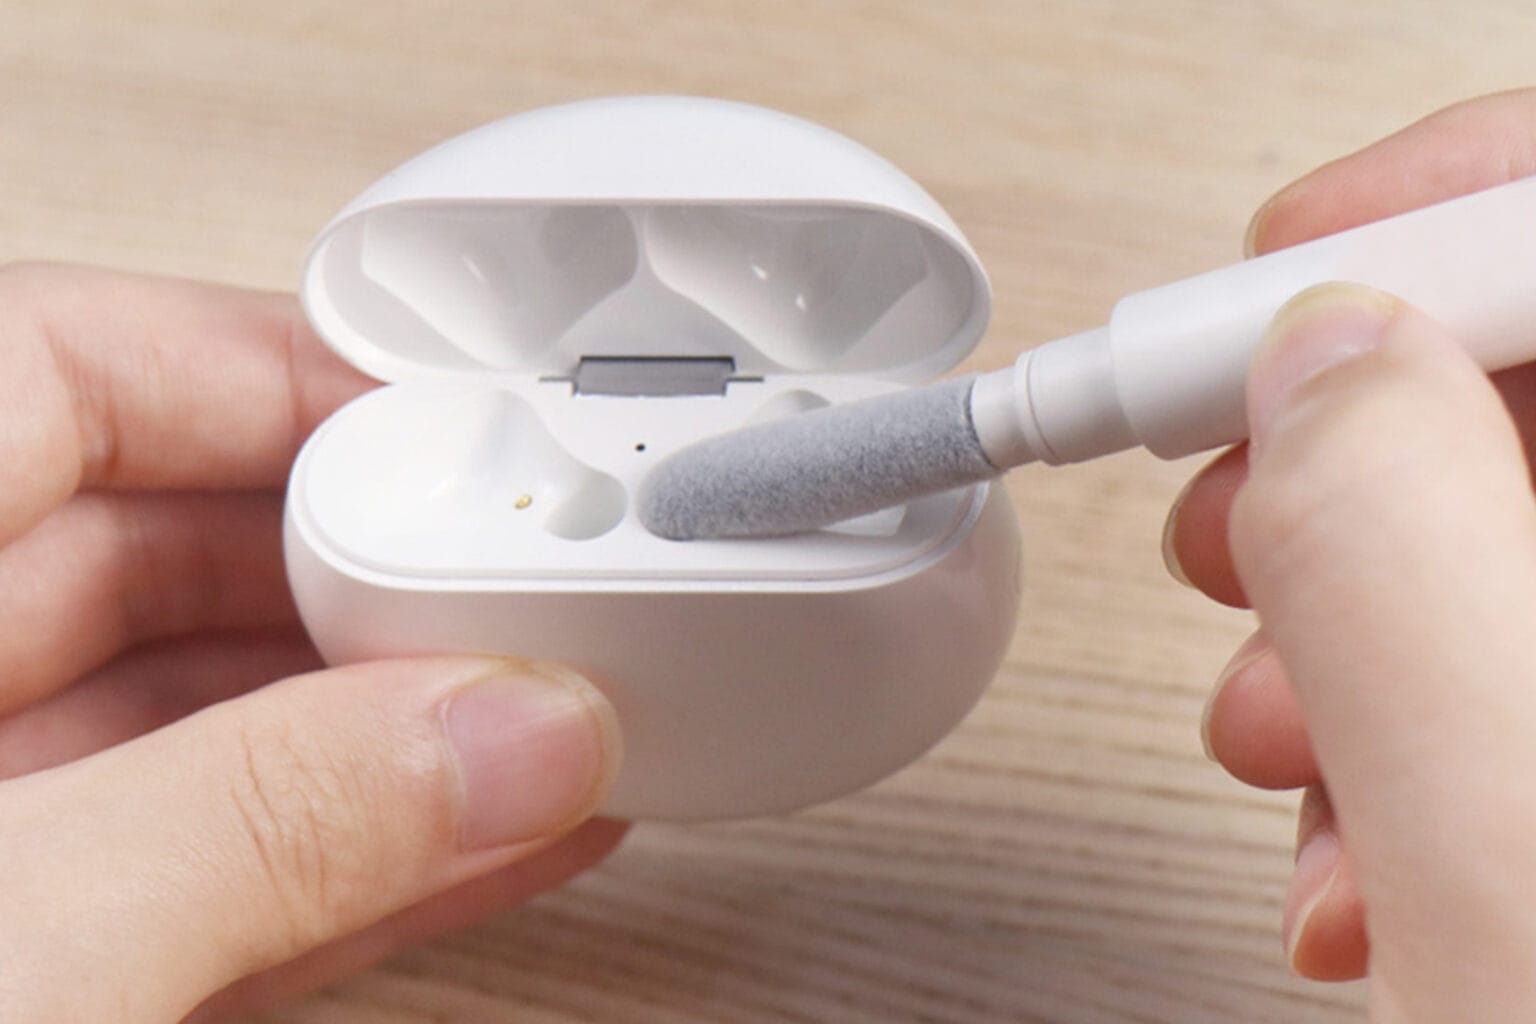 Keep your AirPods in perfect condition with this cleaning kit and charger, now less than $23.